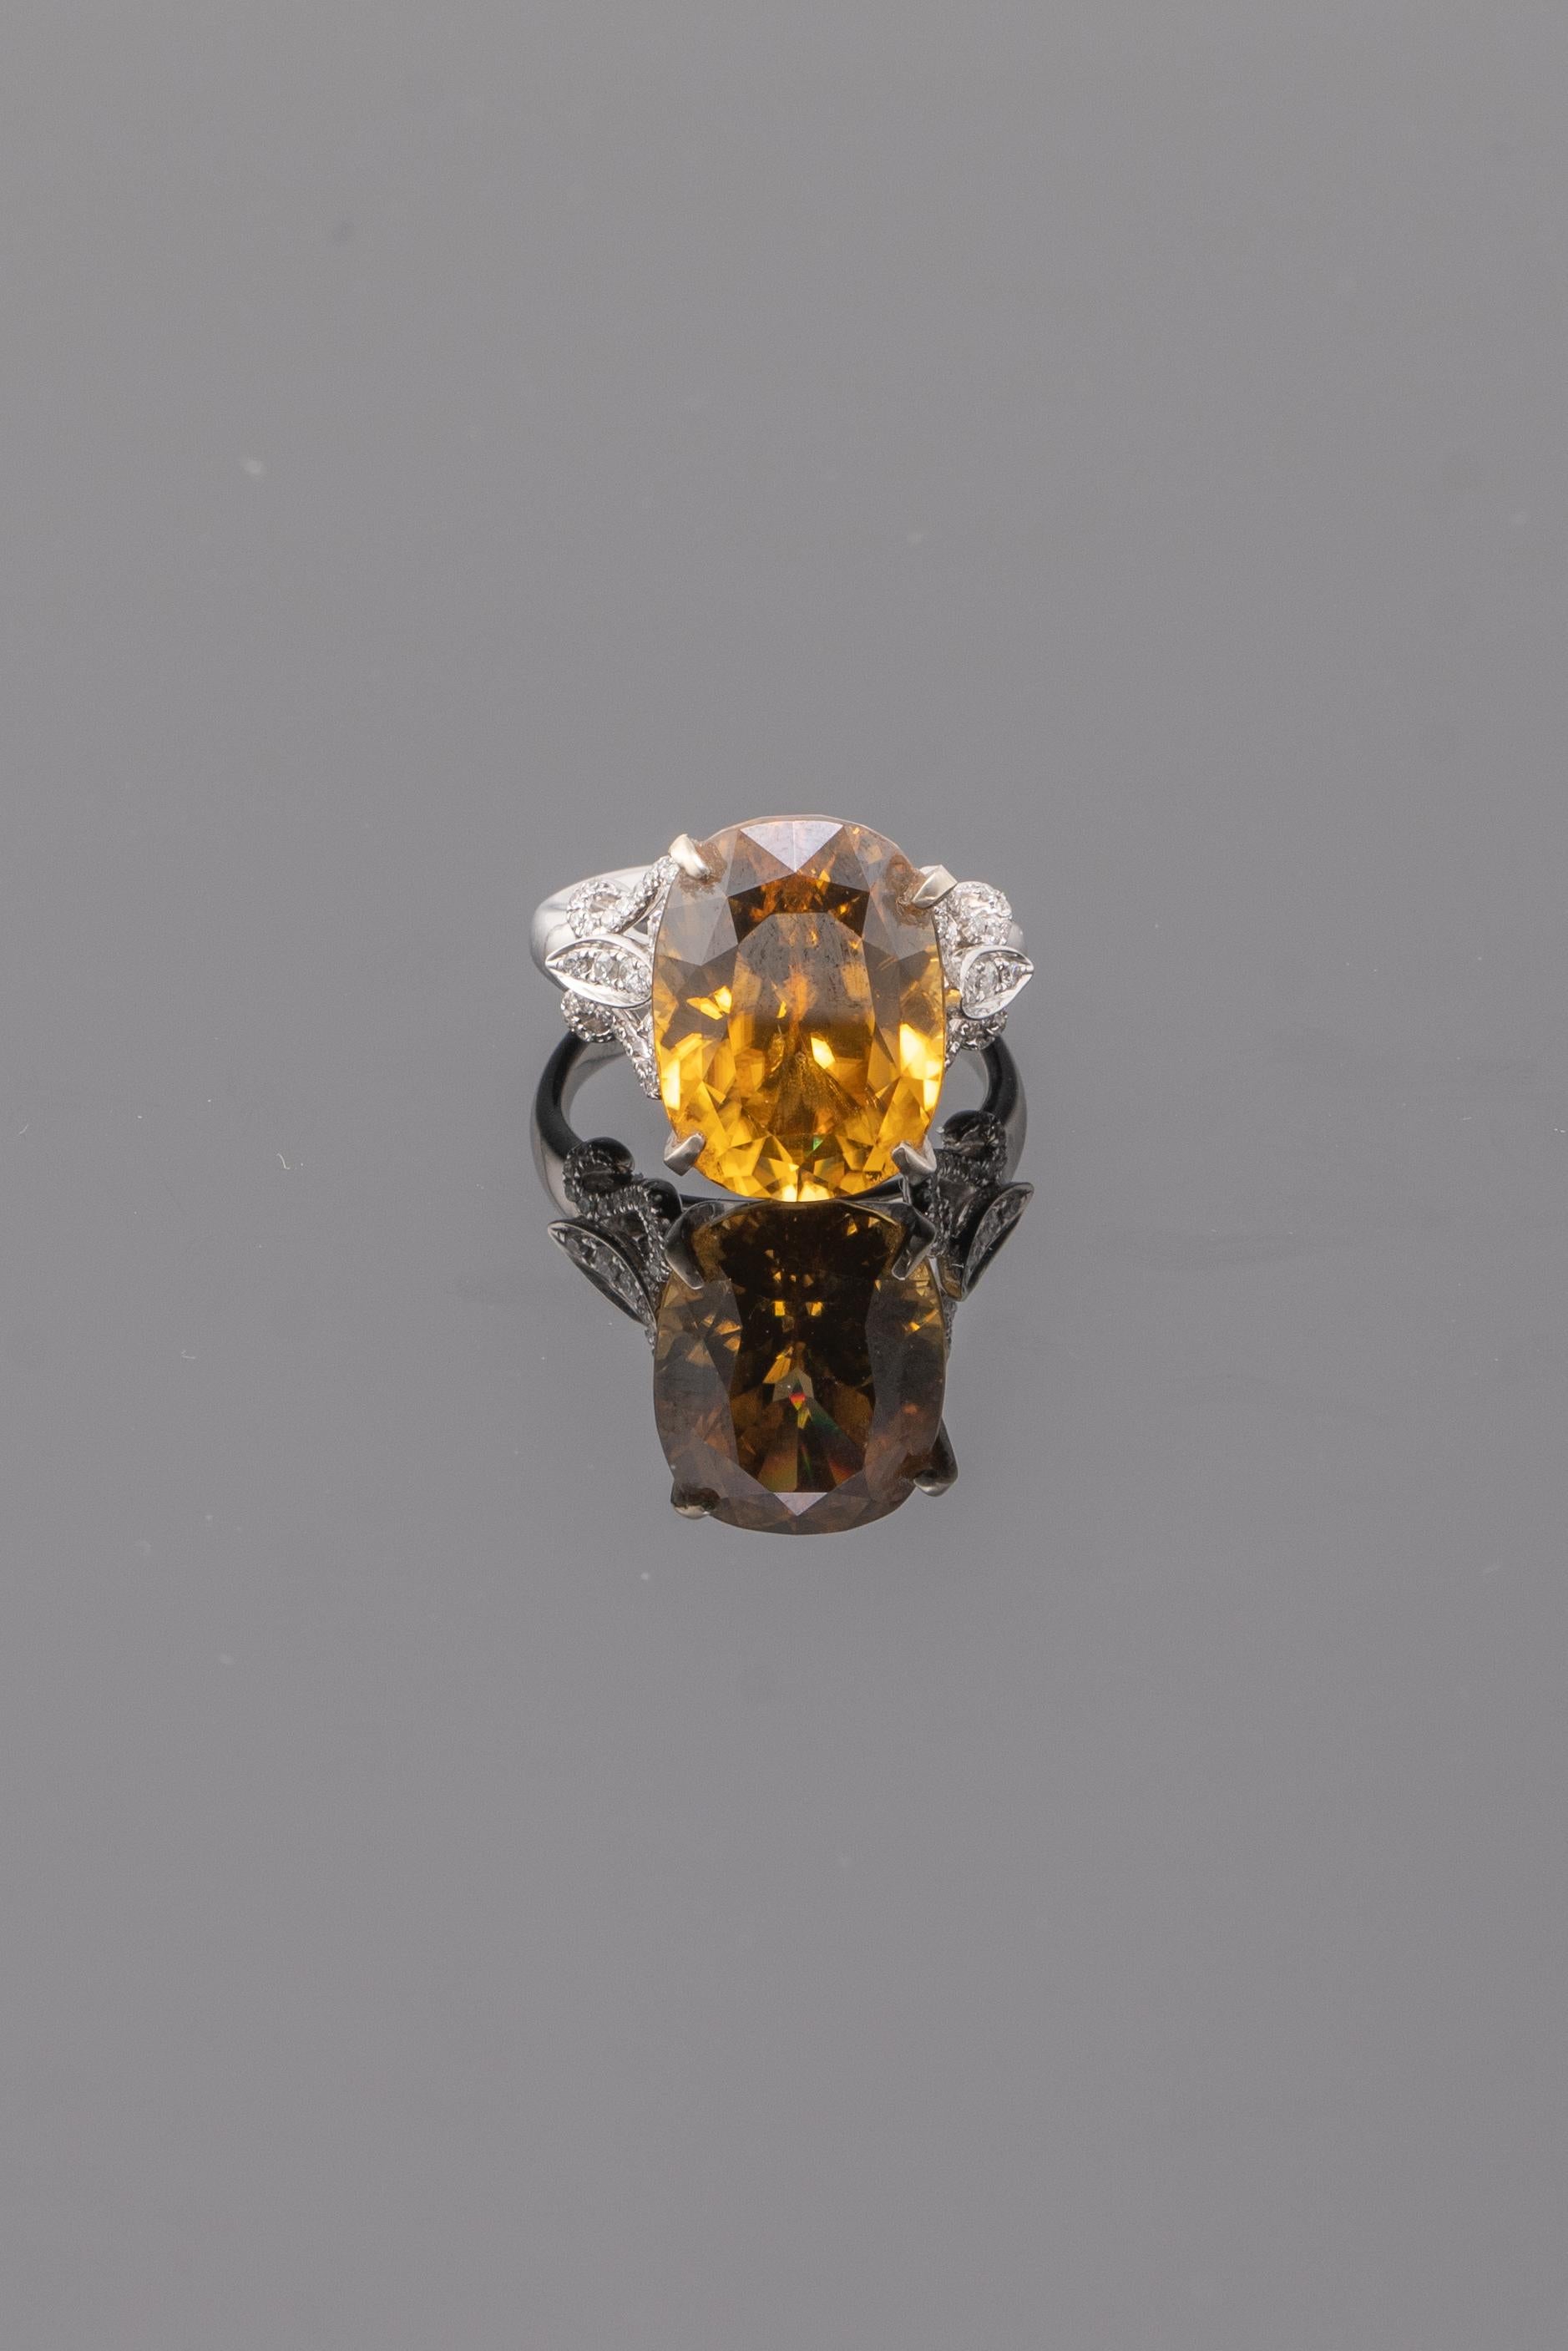 A cocktail ring with a very unique colored stone, 20.38 carat natural Yellow Zircon and Diamonds set in solid 18K White Gold - which can be worn casually and for formal events as well. The centre stone has great luster and fire, with a beautiful